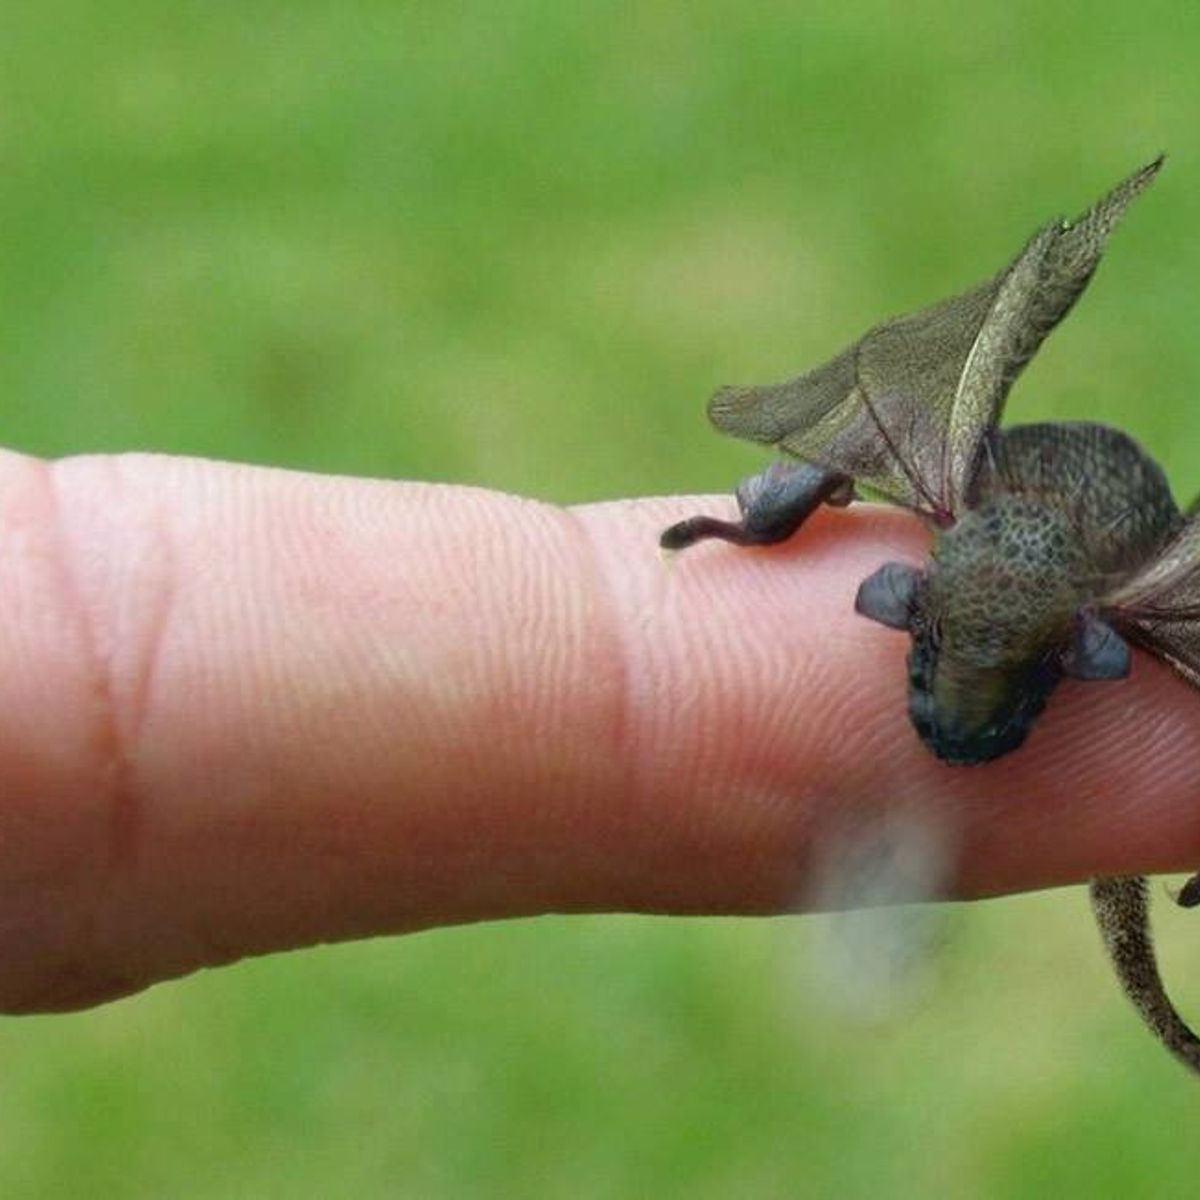 Is This a Newly Hatched Dragon? | Snopes.com